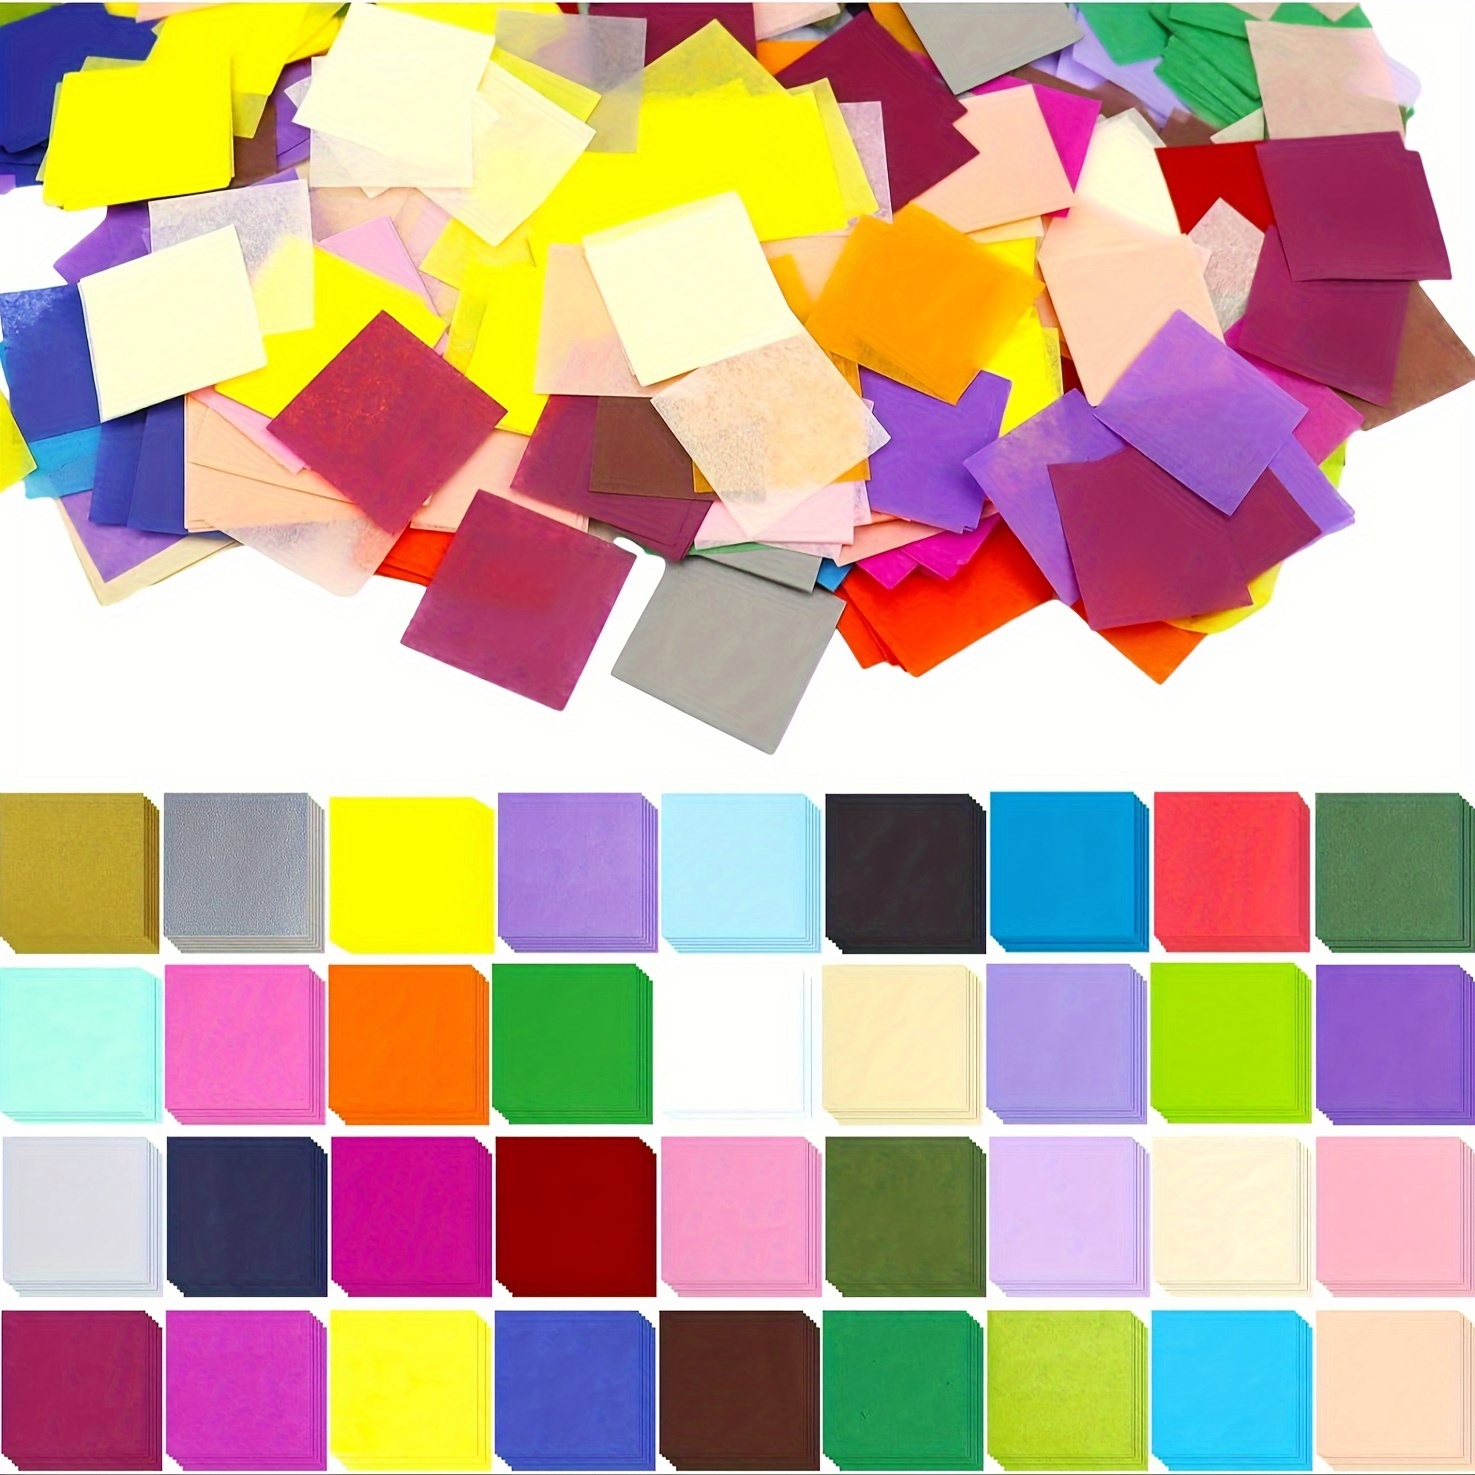 

4000pcs 2 Inch Tissue Paper Squares, 40 Assorted Colors Precut Craft Paper, Tissue Paper Squares For Arts Craft Diy Scrapbooking Scrunch Art Projects